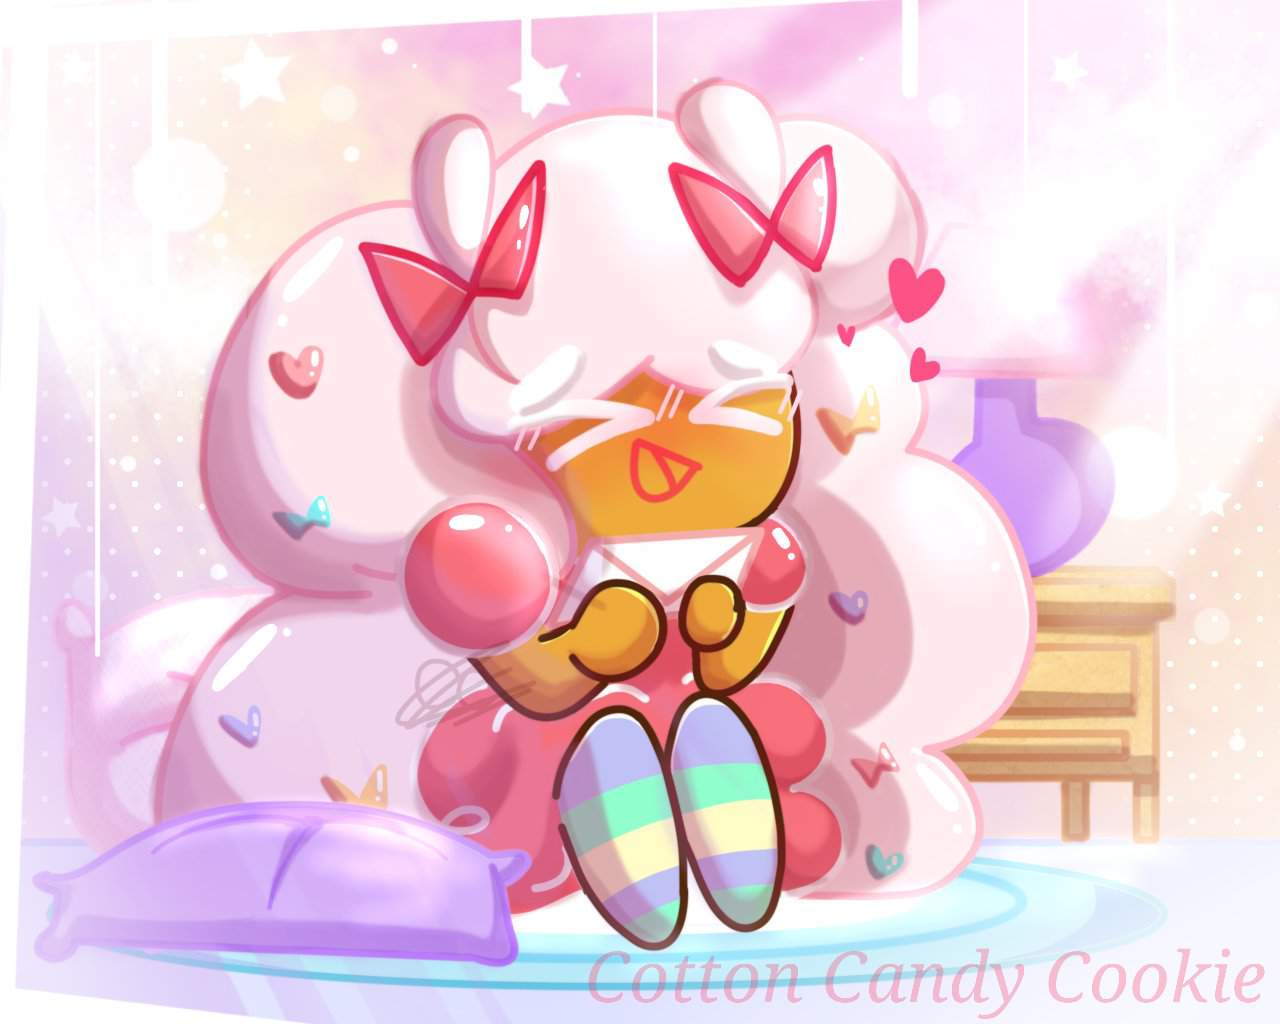 Cotton candy cookie | *Cookie Run* Amino